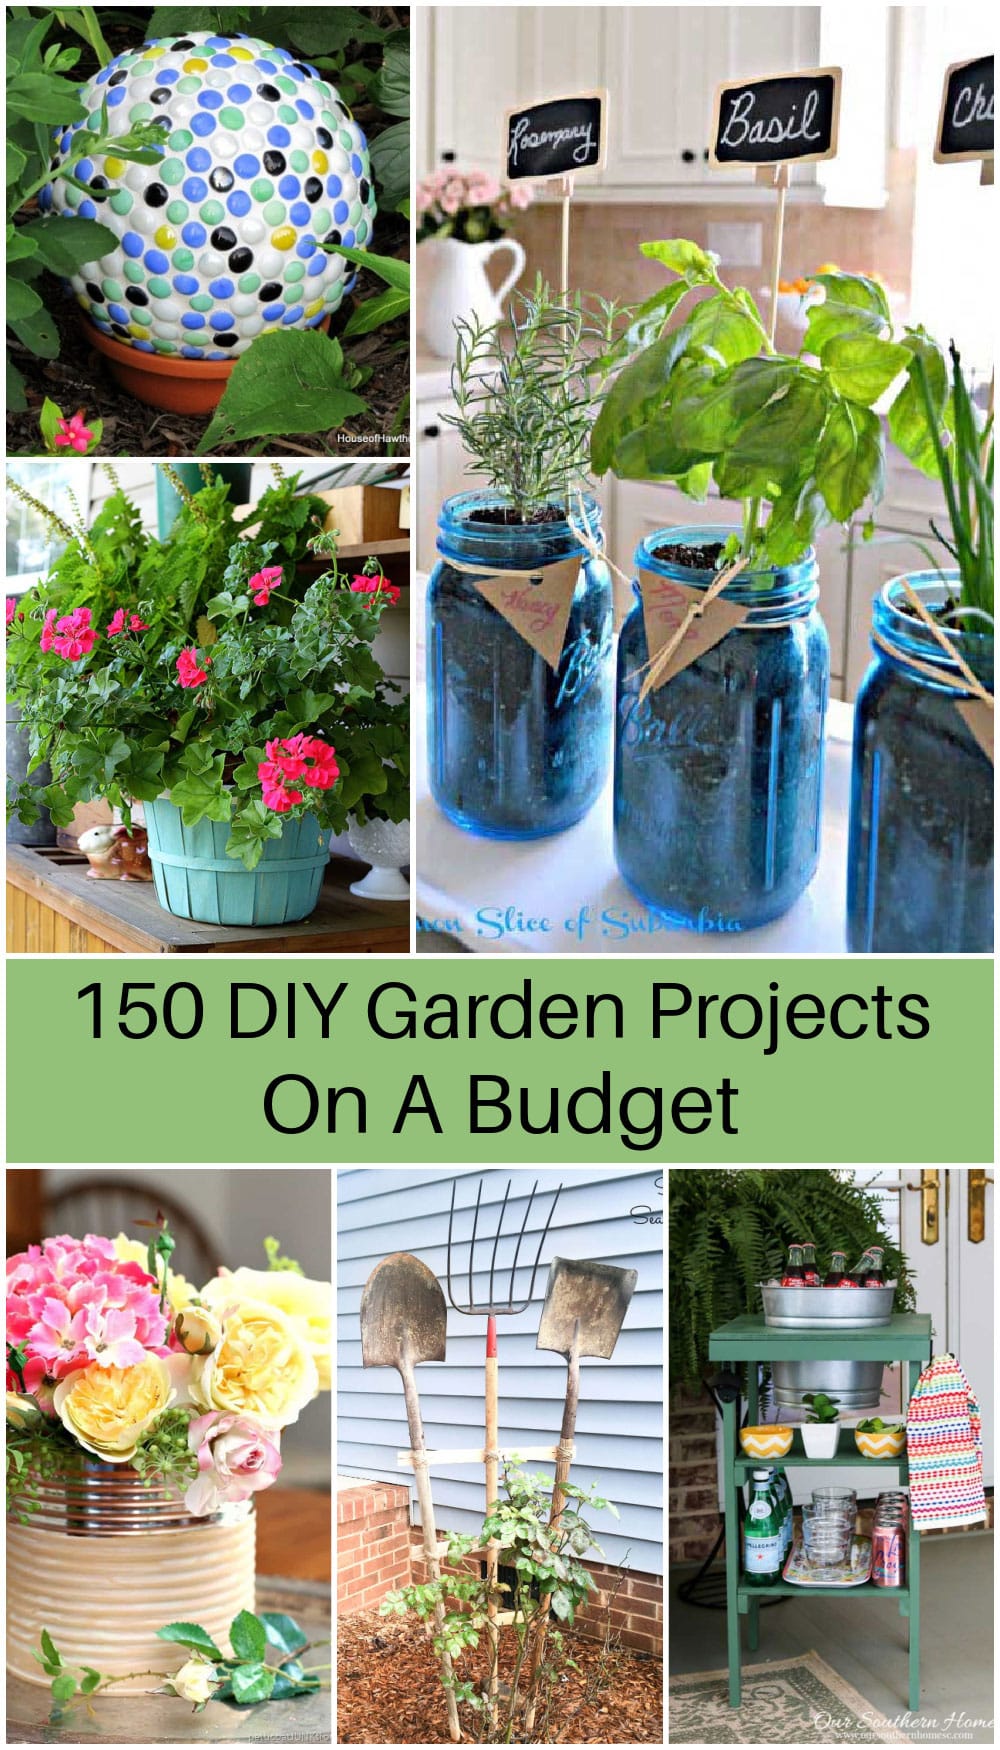 Over 150 budget-friendly projects to make for your garden this year.